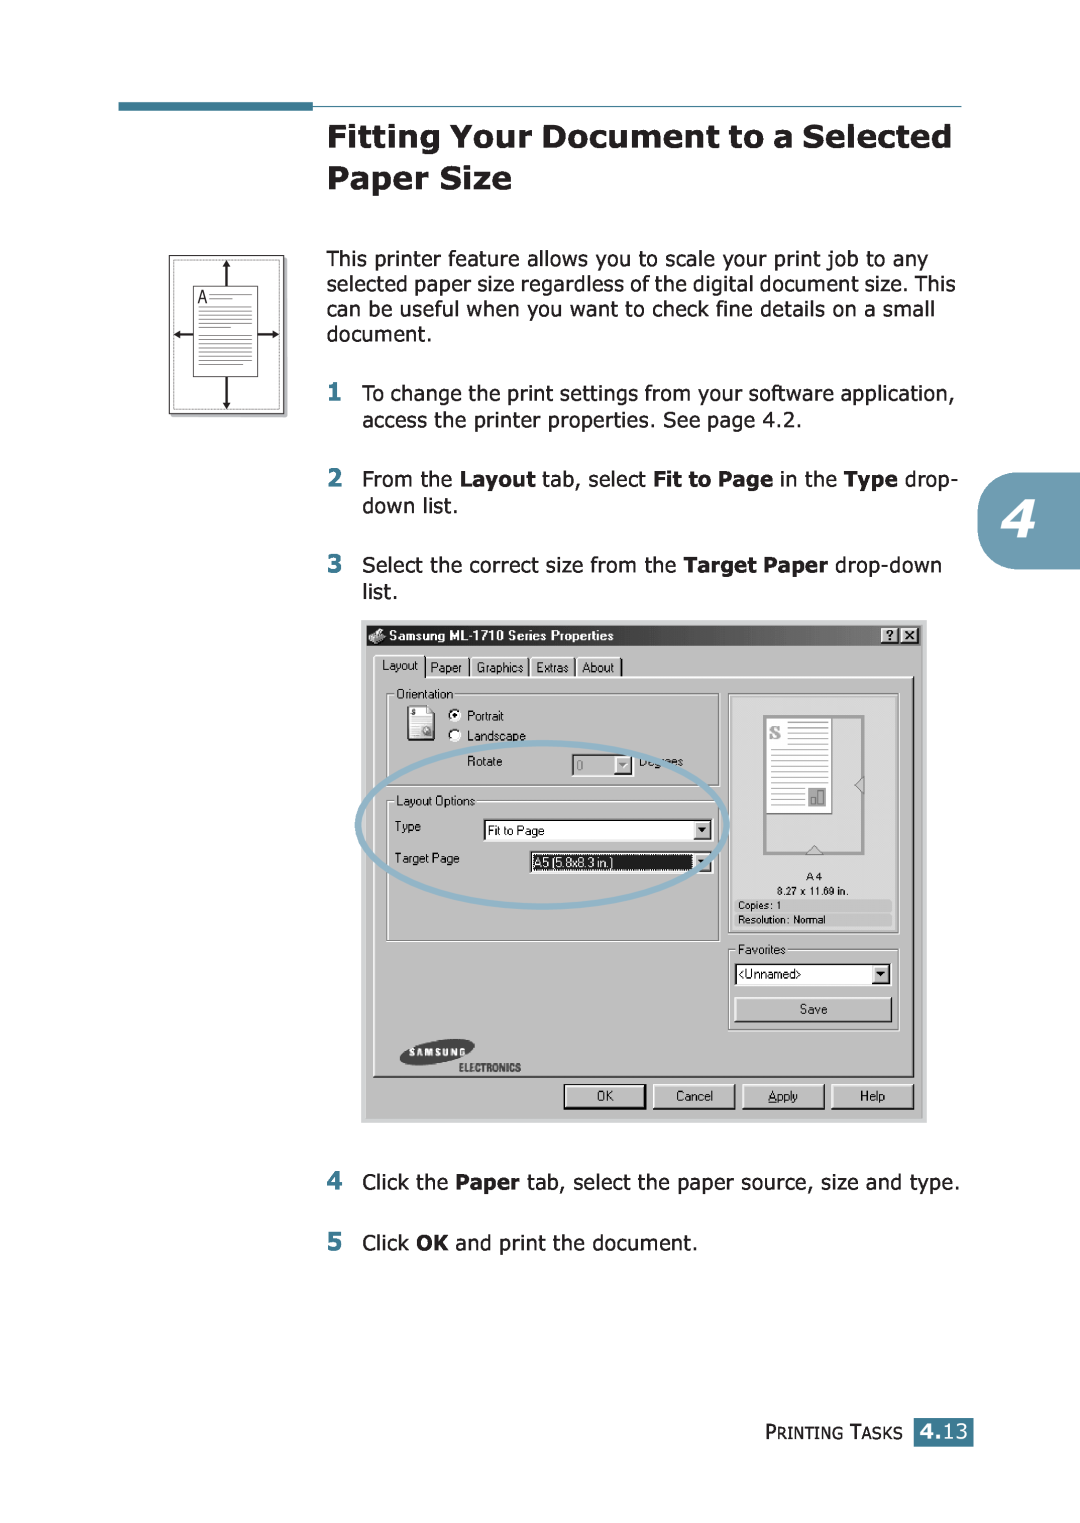 Samsung ML-1710P manual Fitting Your Document to a Selected Paper Size 